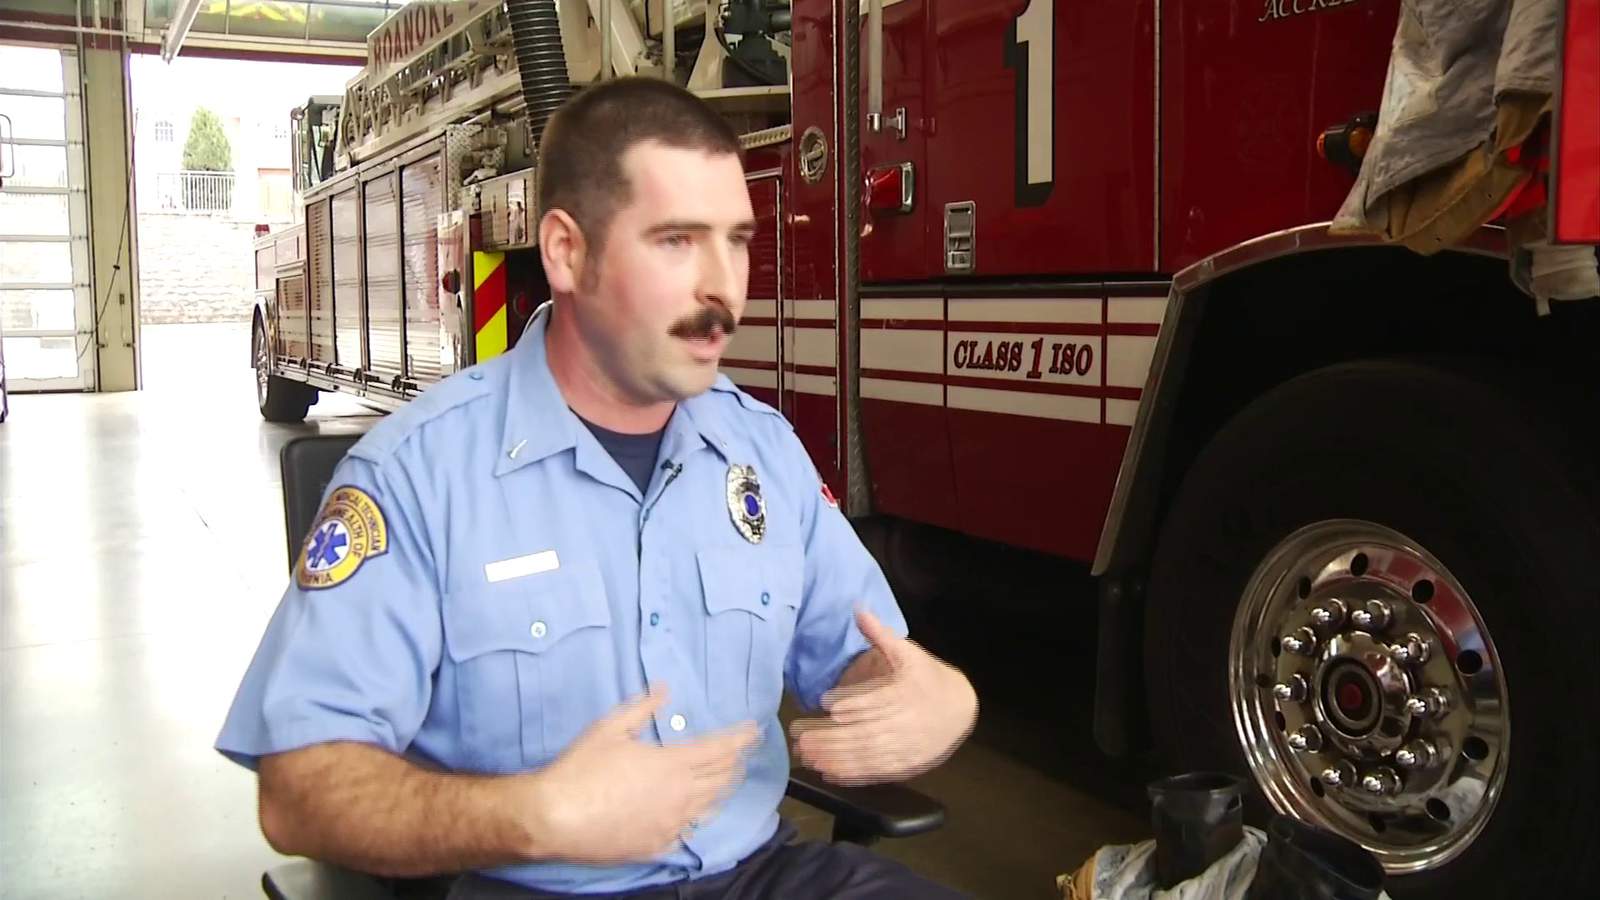 Hero: Local first responder risks his life to save drowning boy